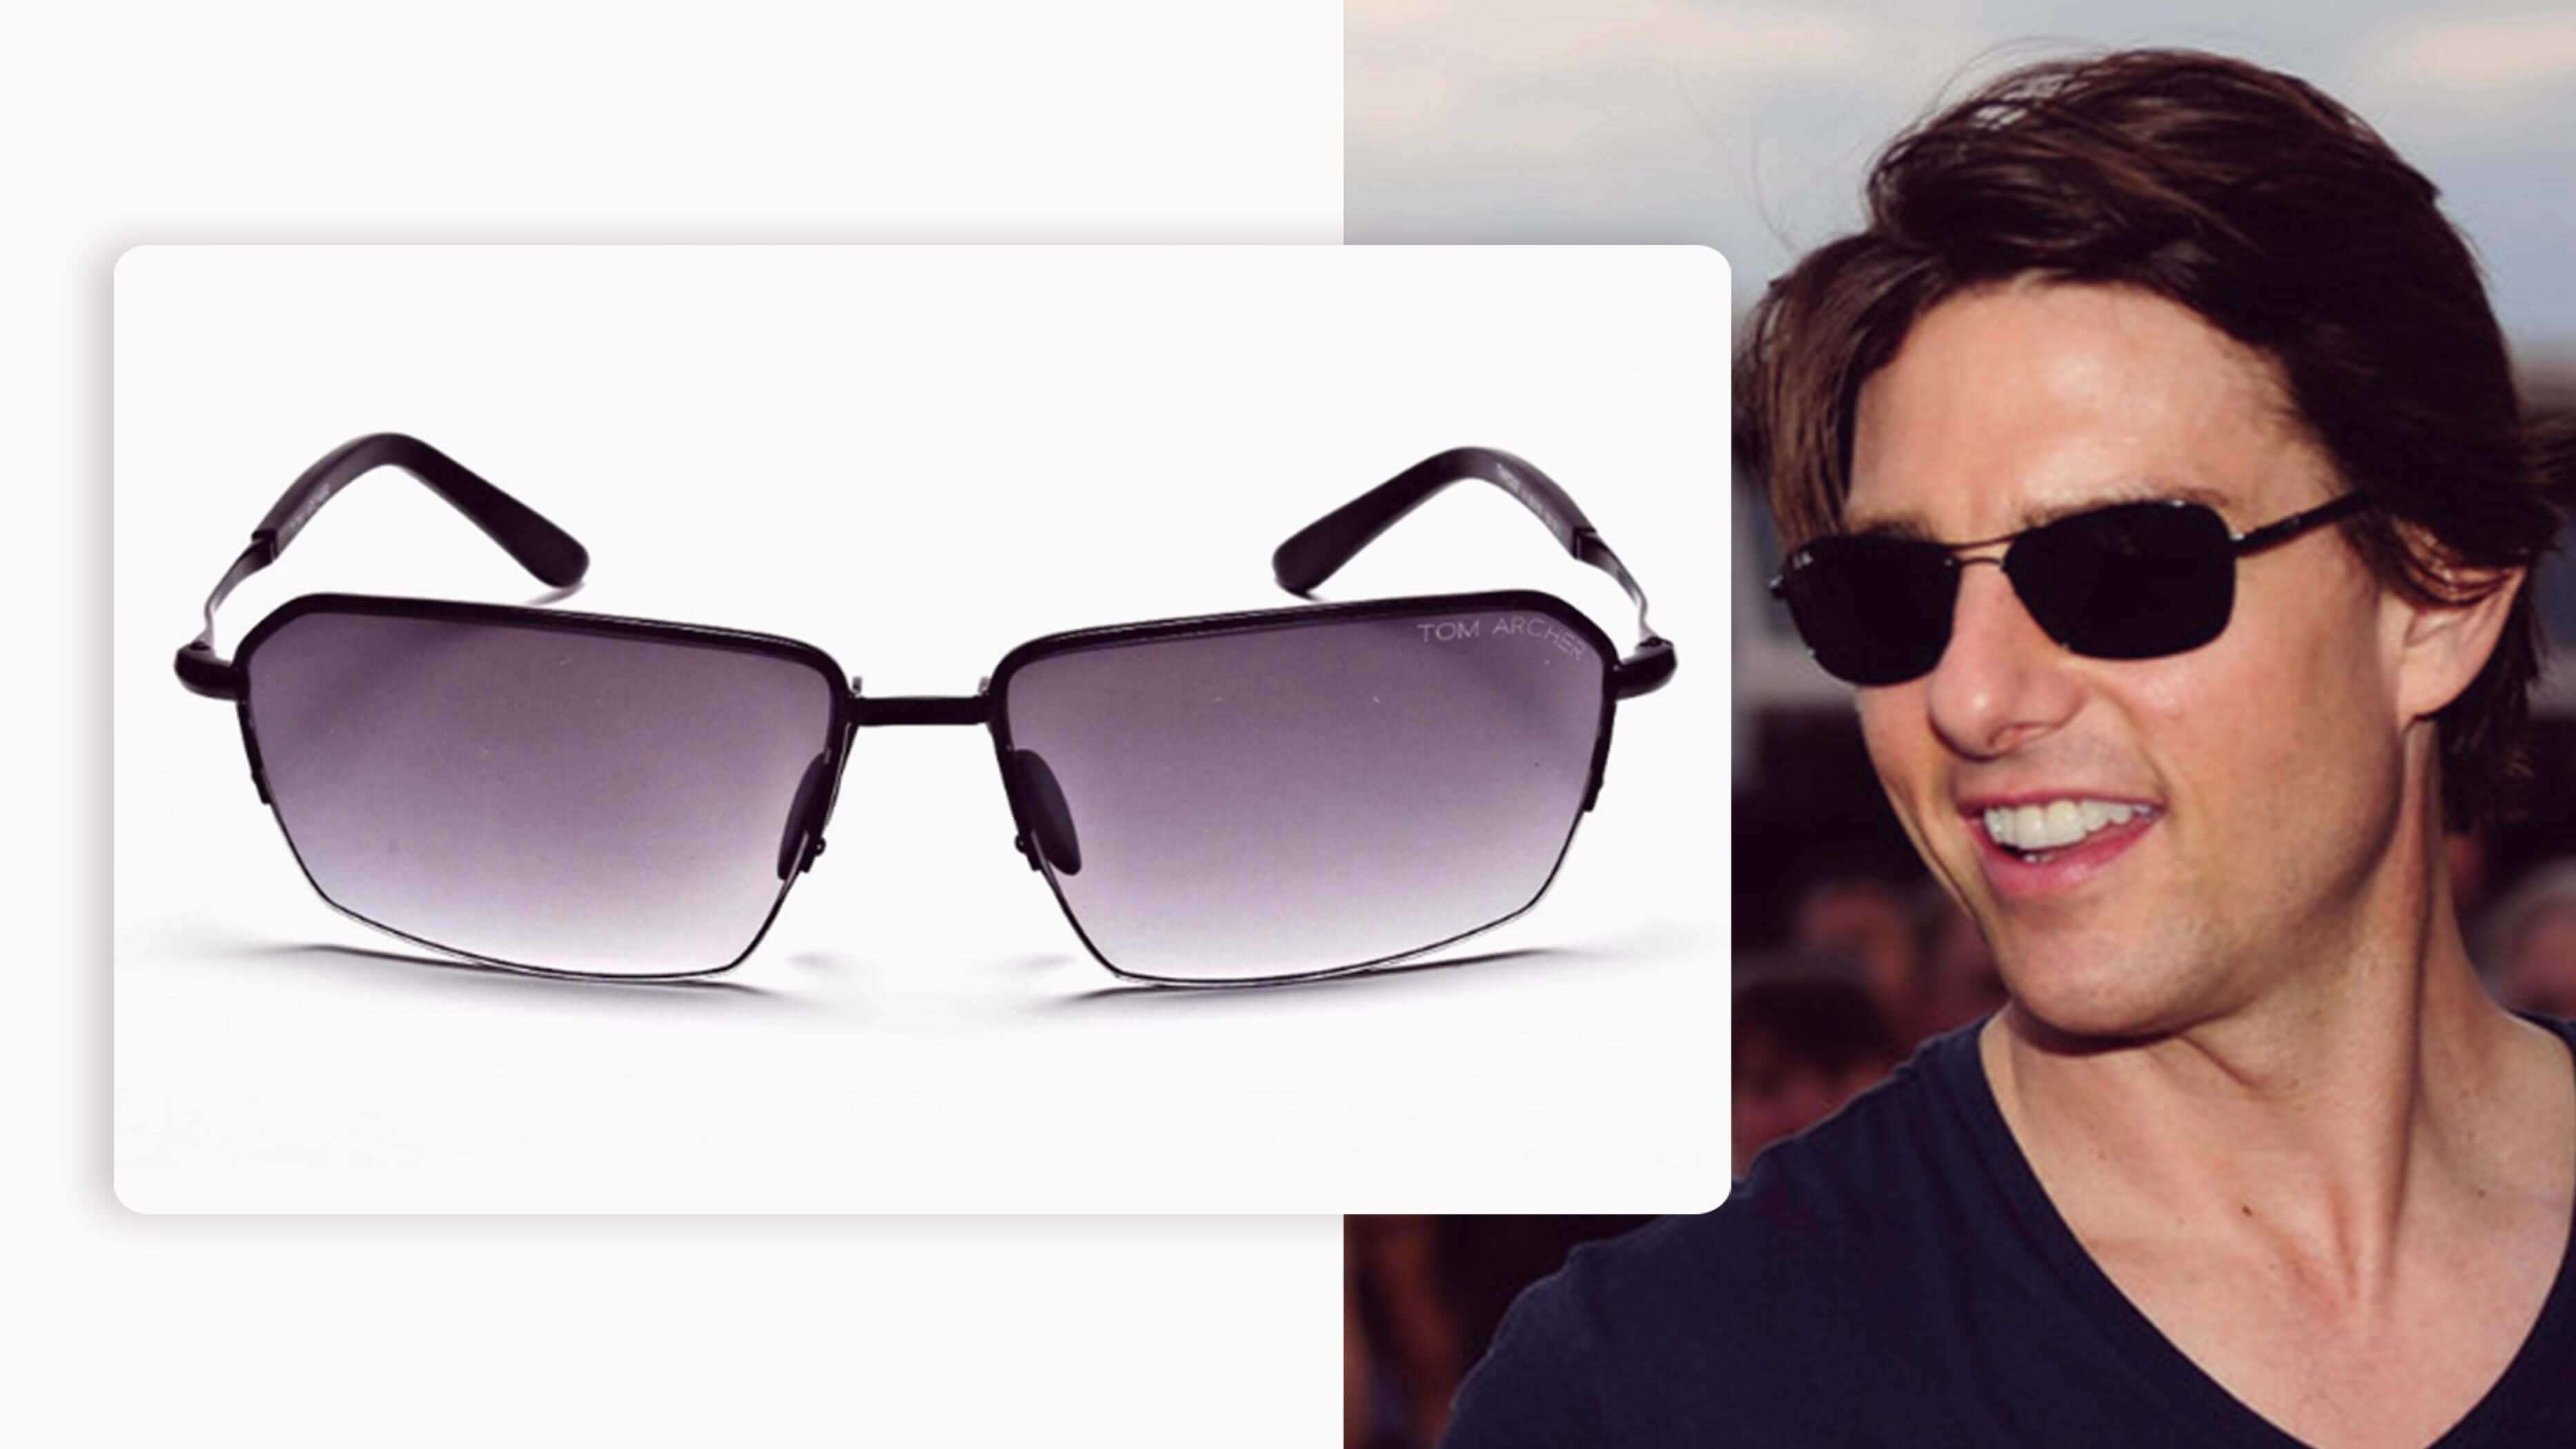 5 Tom Cruise Sunglasses And Glasses From Top Gun To Mission Impossible